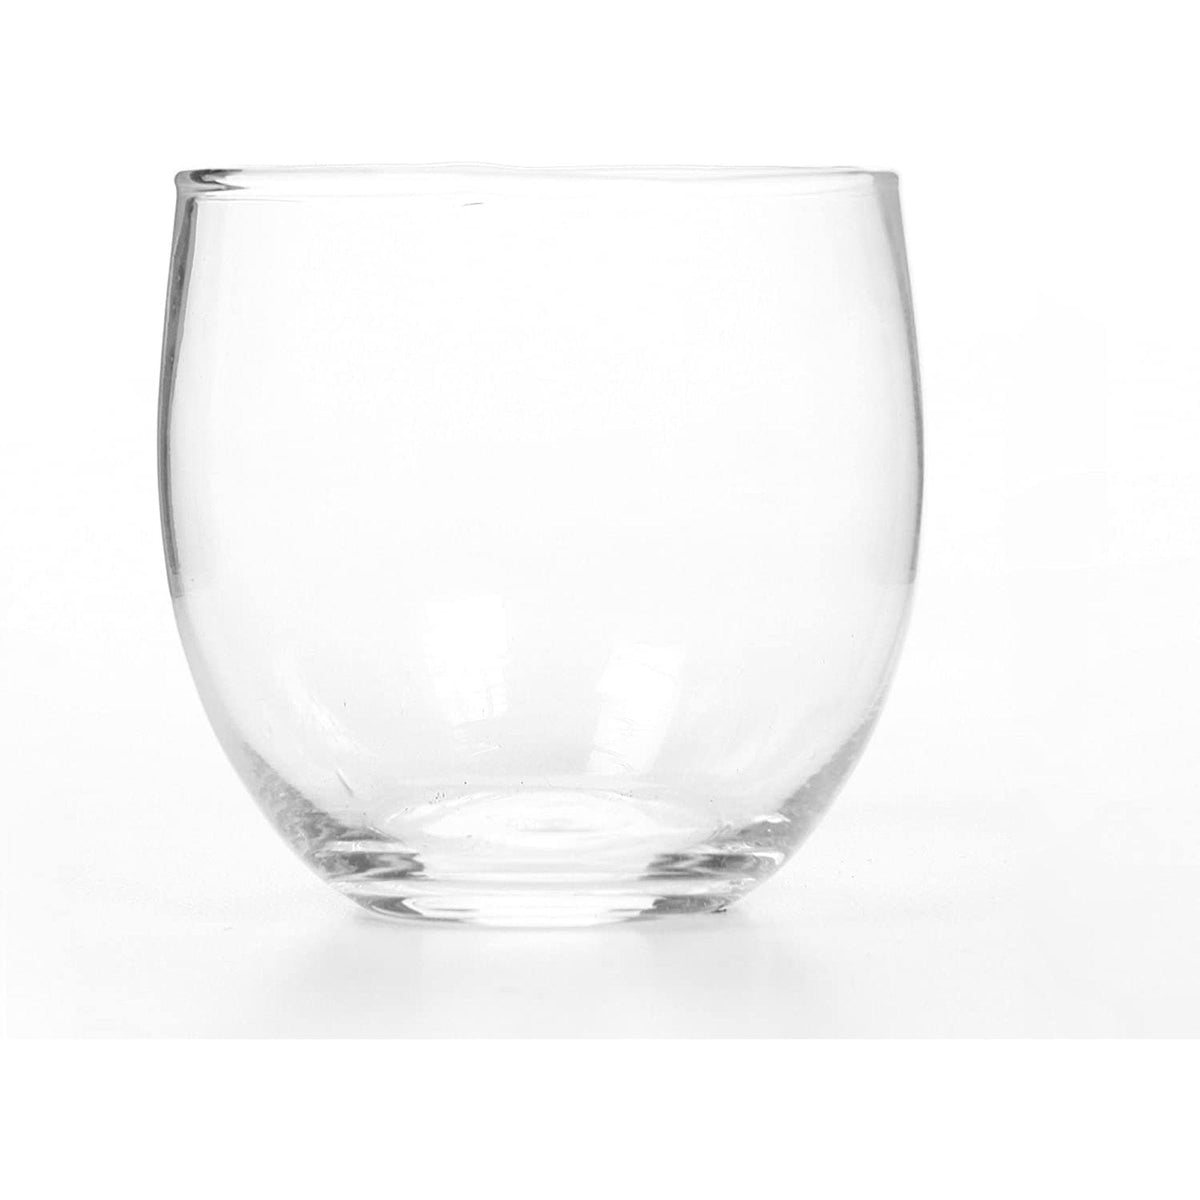 HOSLEY®  Glass Clear Tea Light Holders,  Roly Poly Style, Set of 12, 2.5 inches Diameter each